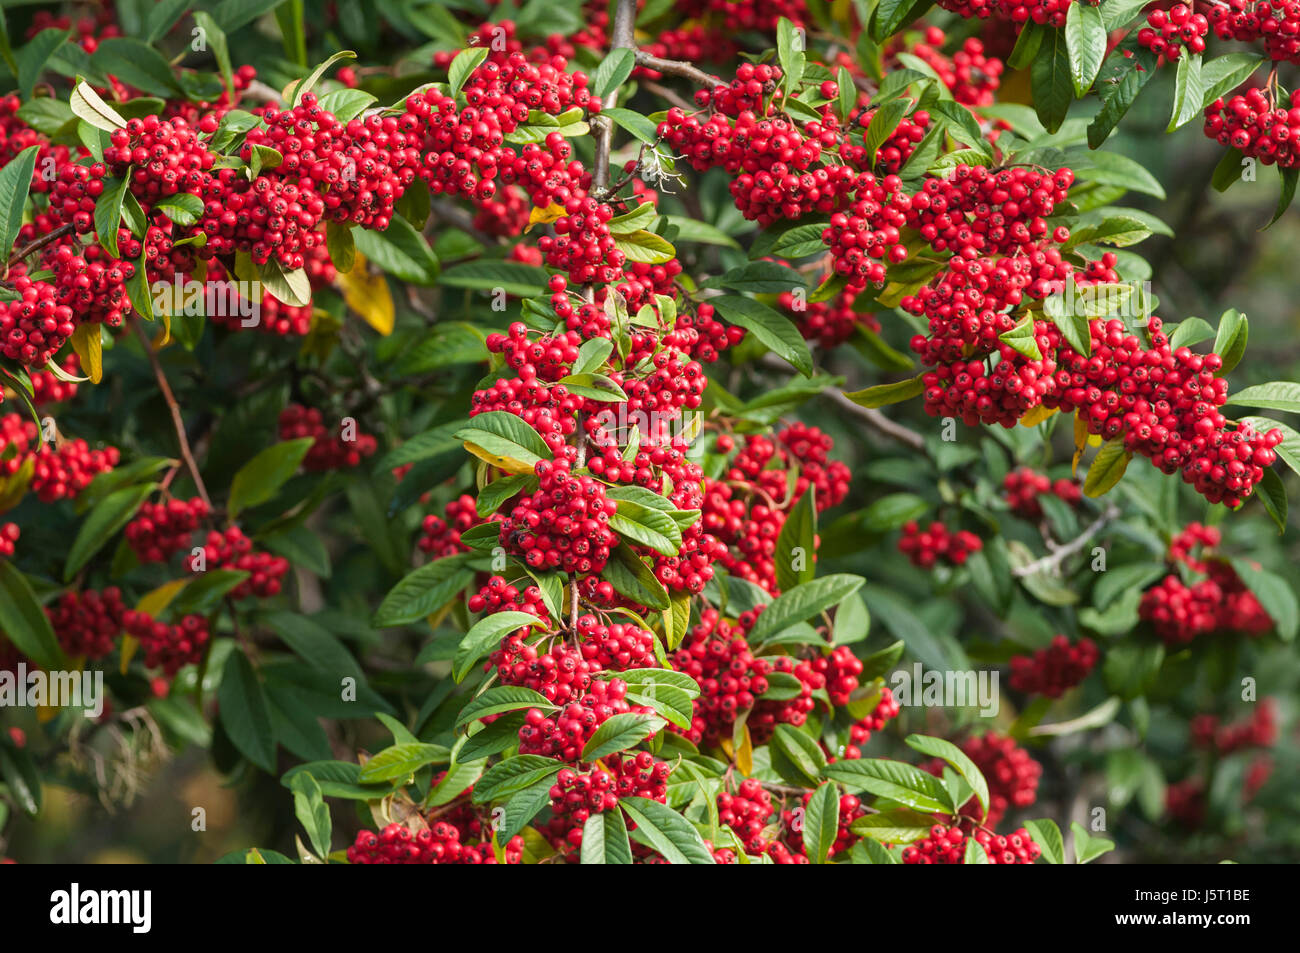 Cotoneaster, Himalayan tree cotoneaster, Cotoneaster frigidus, Plant covered in red berries. Stock Photo